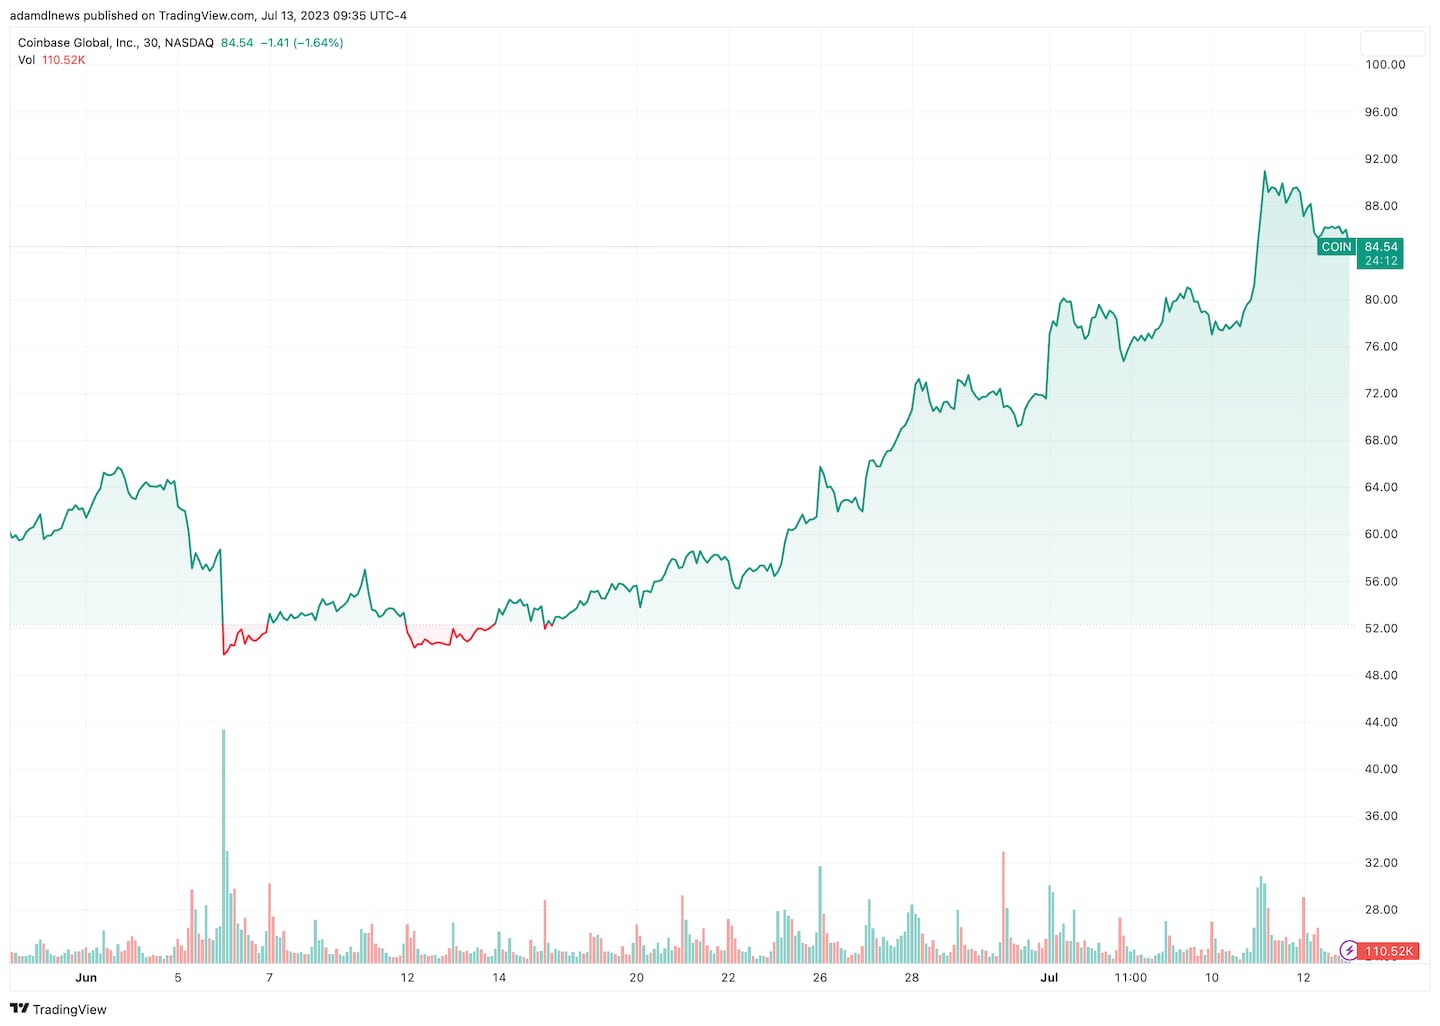 Coinbase share price since June, via TradingView. Shares price has jumped since SEC action.